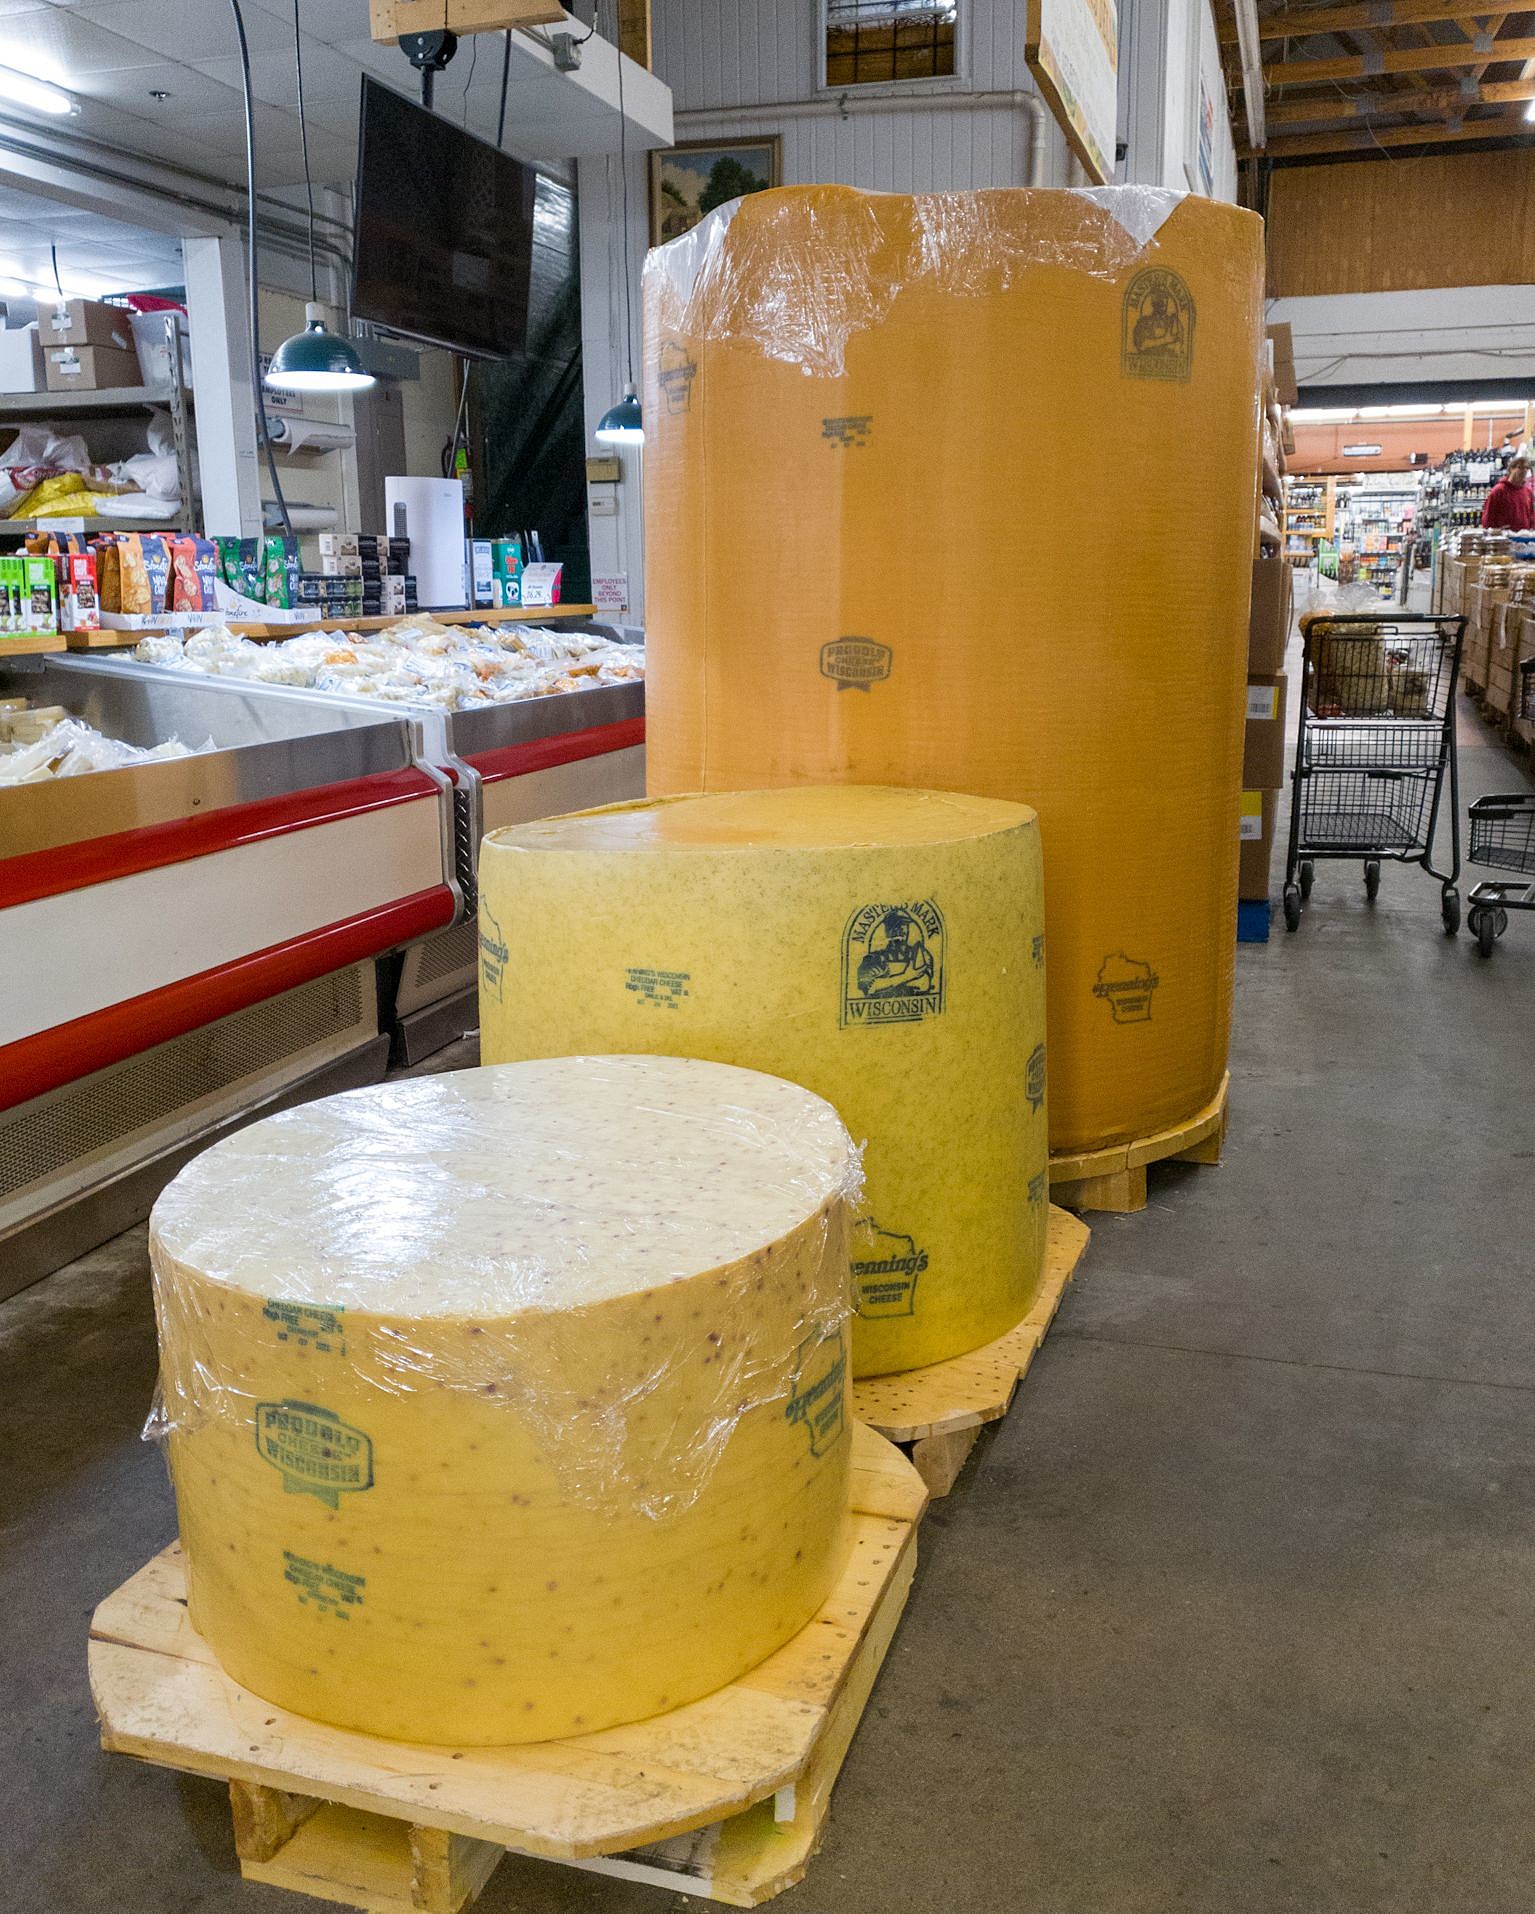 This is What $35,000 Worth of Cheese Looks Like